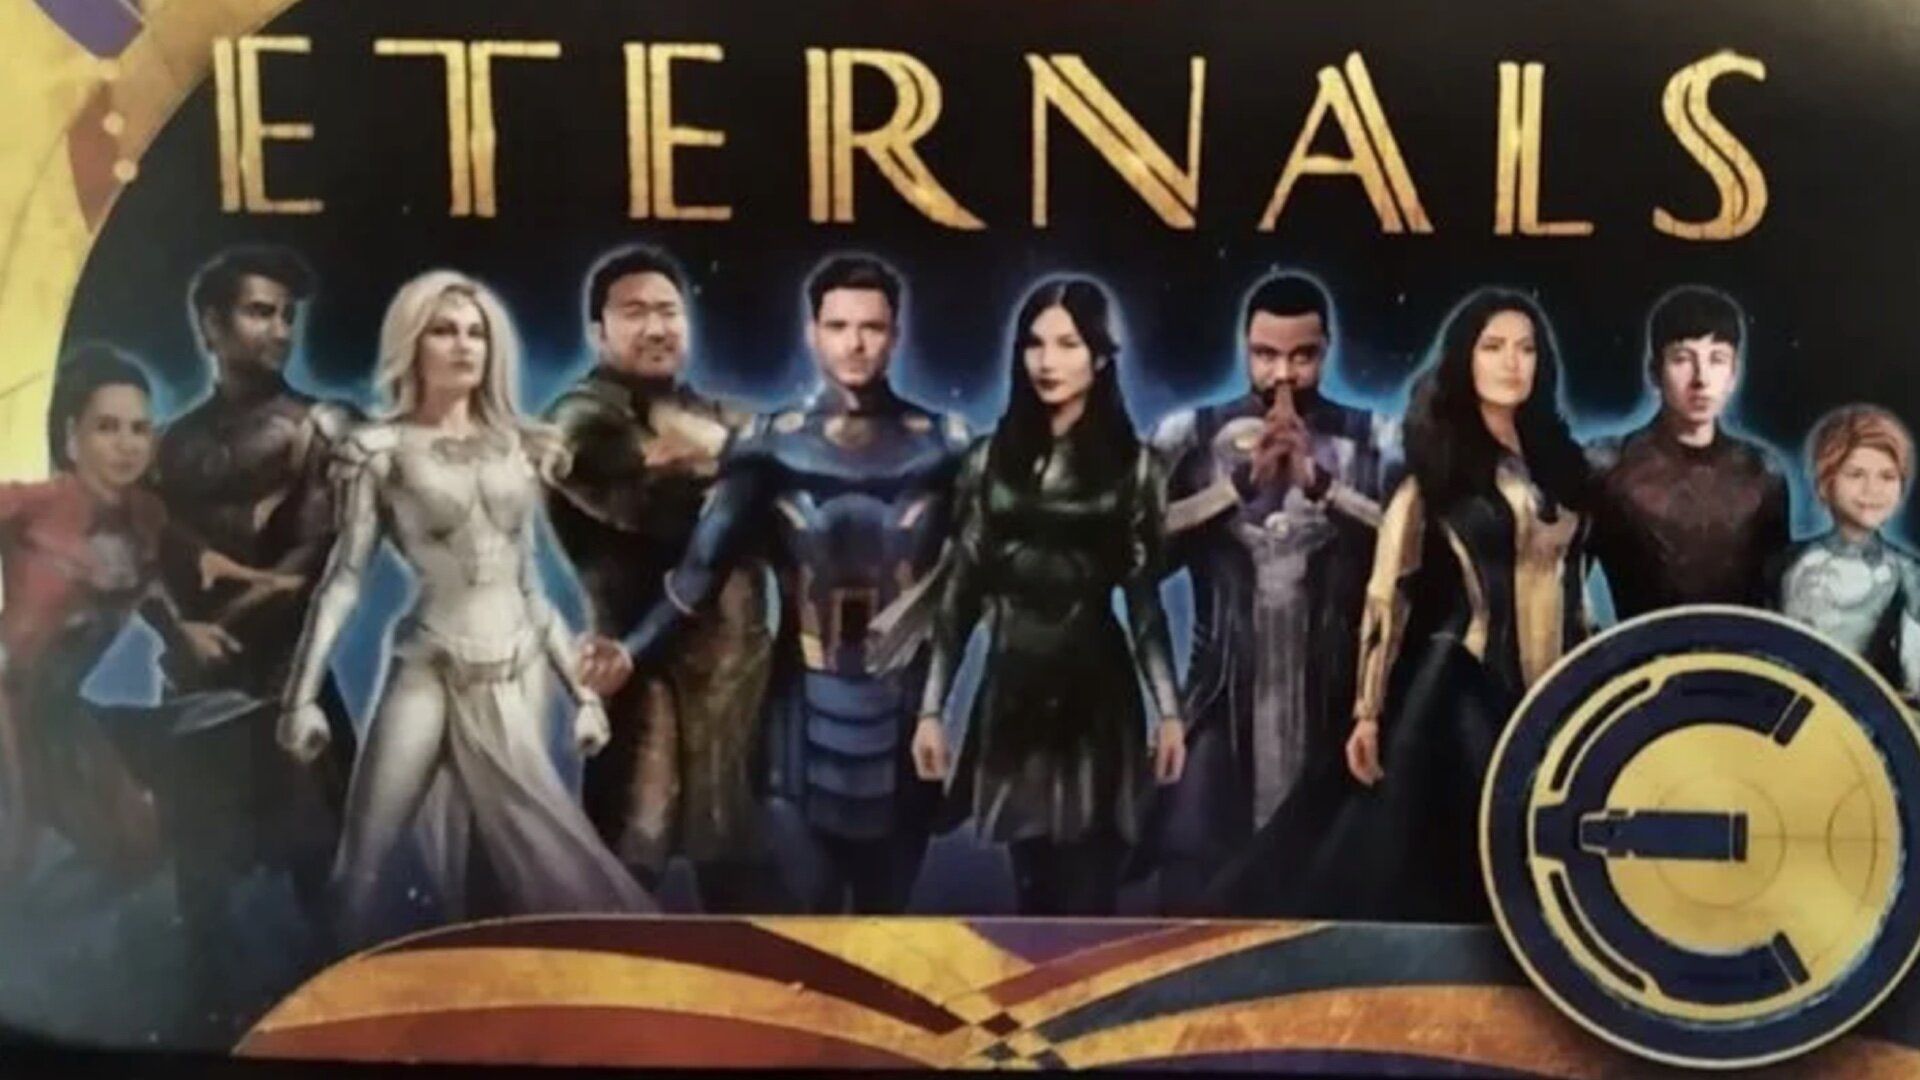 Eternals Movie All Cast Wallpapers